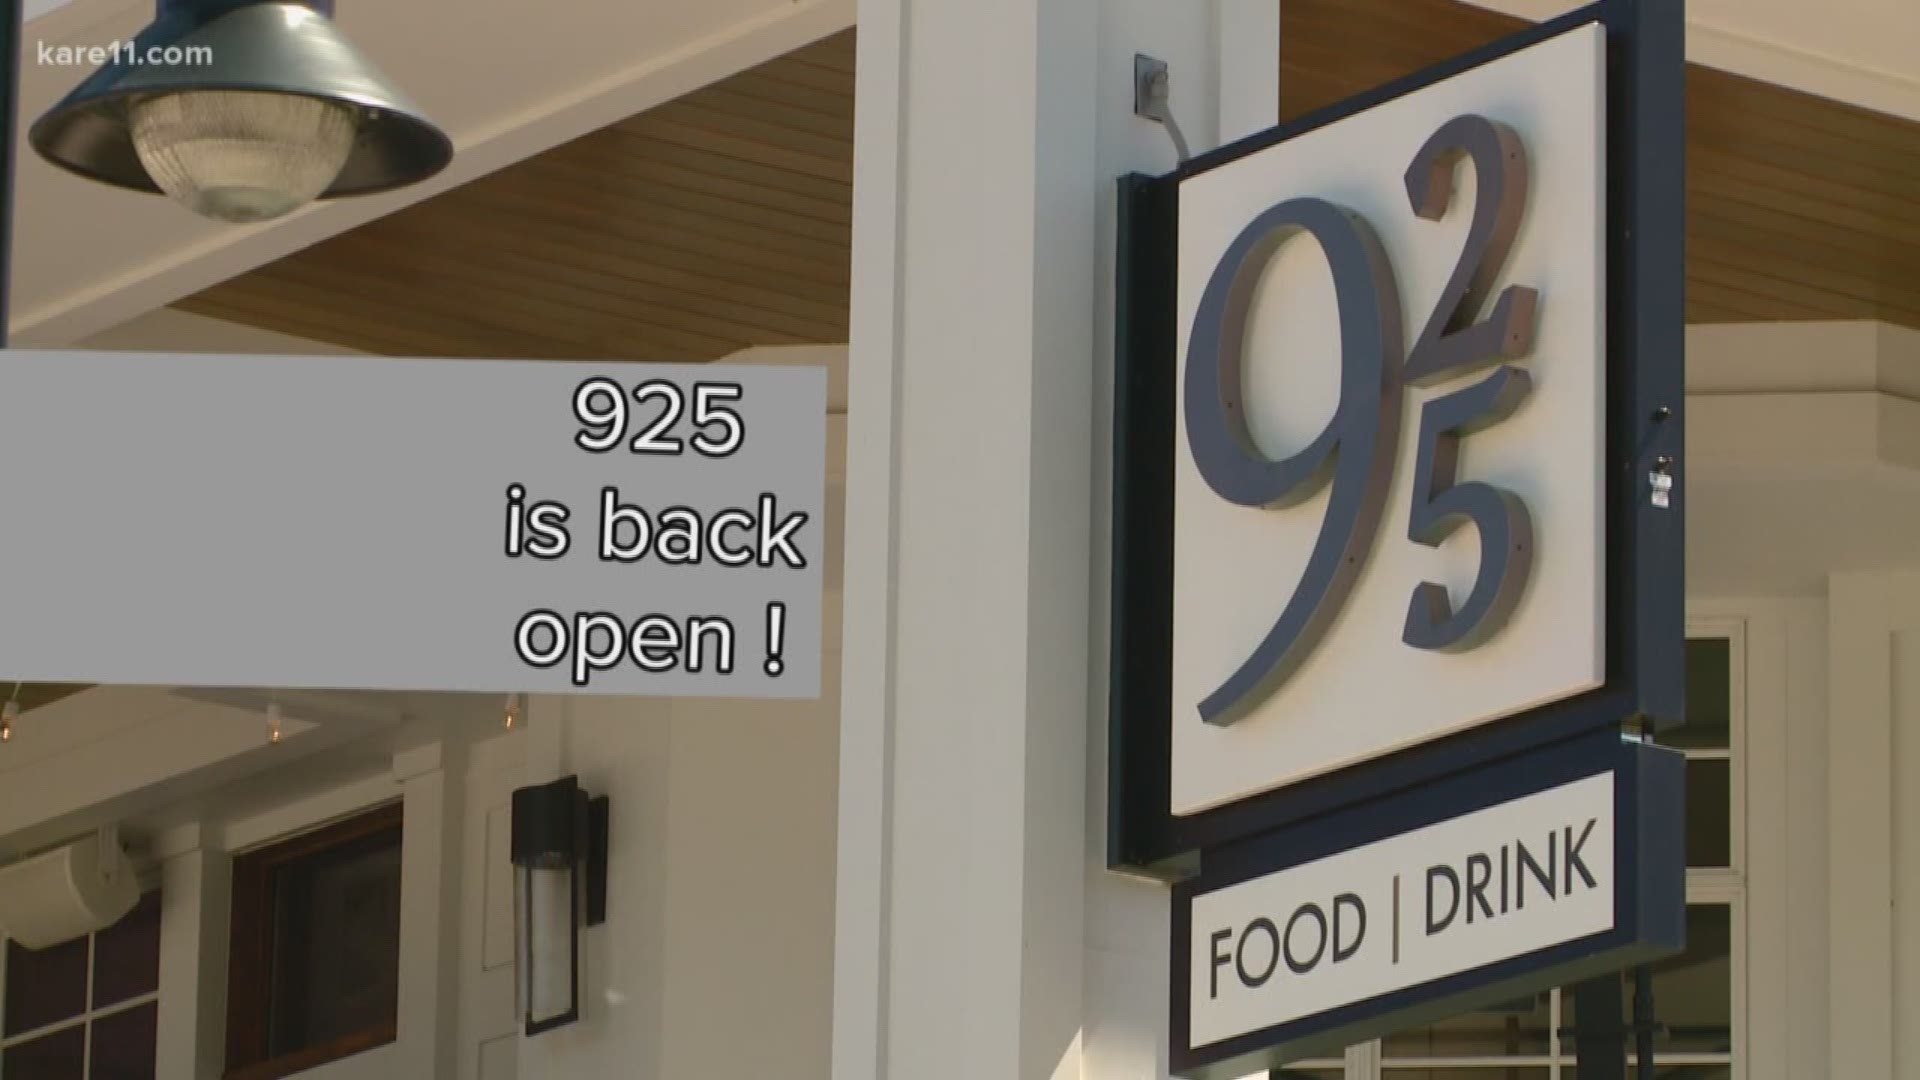 Wayzata's ninetwentyfive has reopened after a brief closure to revamp everything from the menu to the uniforms of the staff. https://kare11.tv/2sYV180� Subscribe to KARE 11: https://www.youtube.com/subscription_center?add_user=kare11 � Watch more KARE